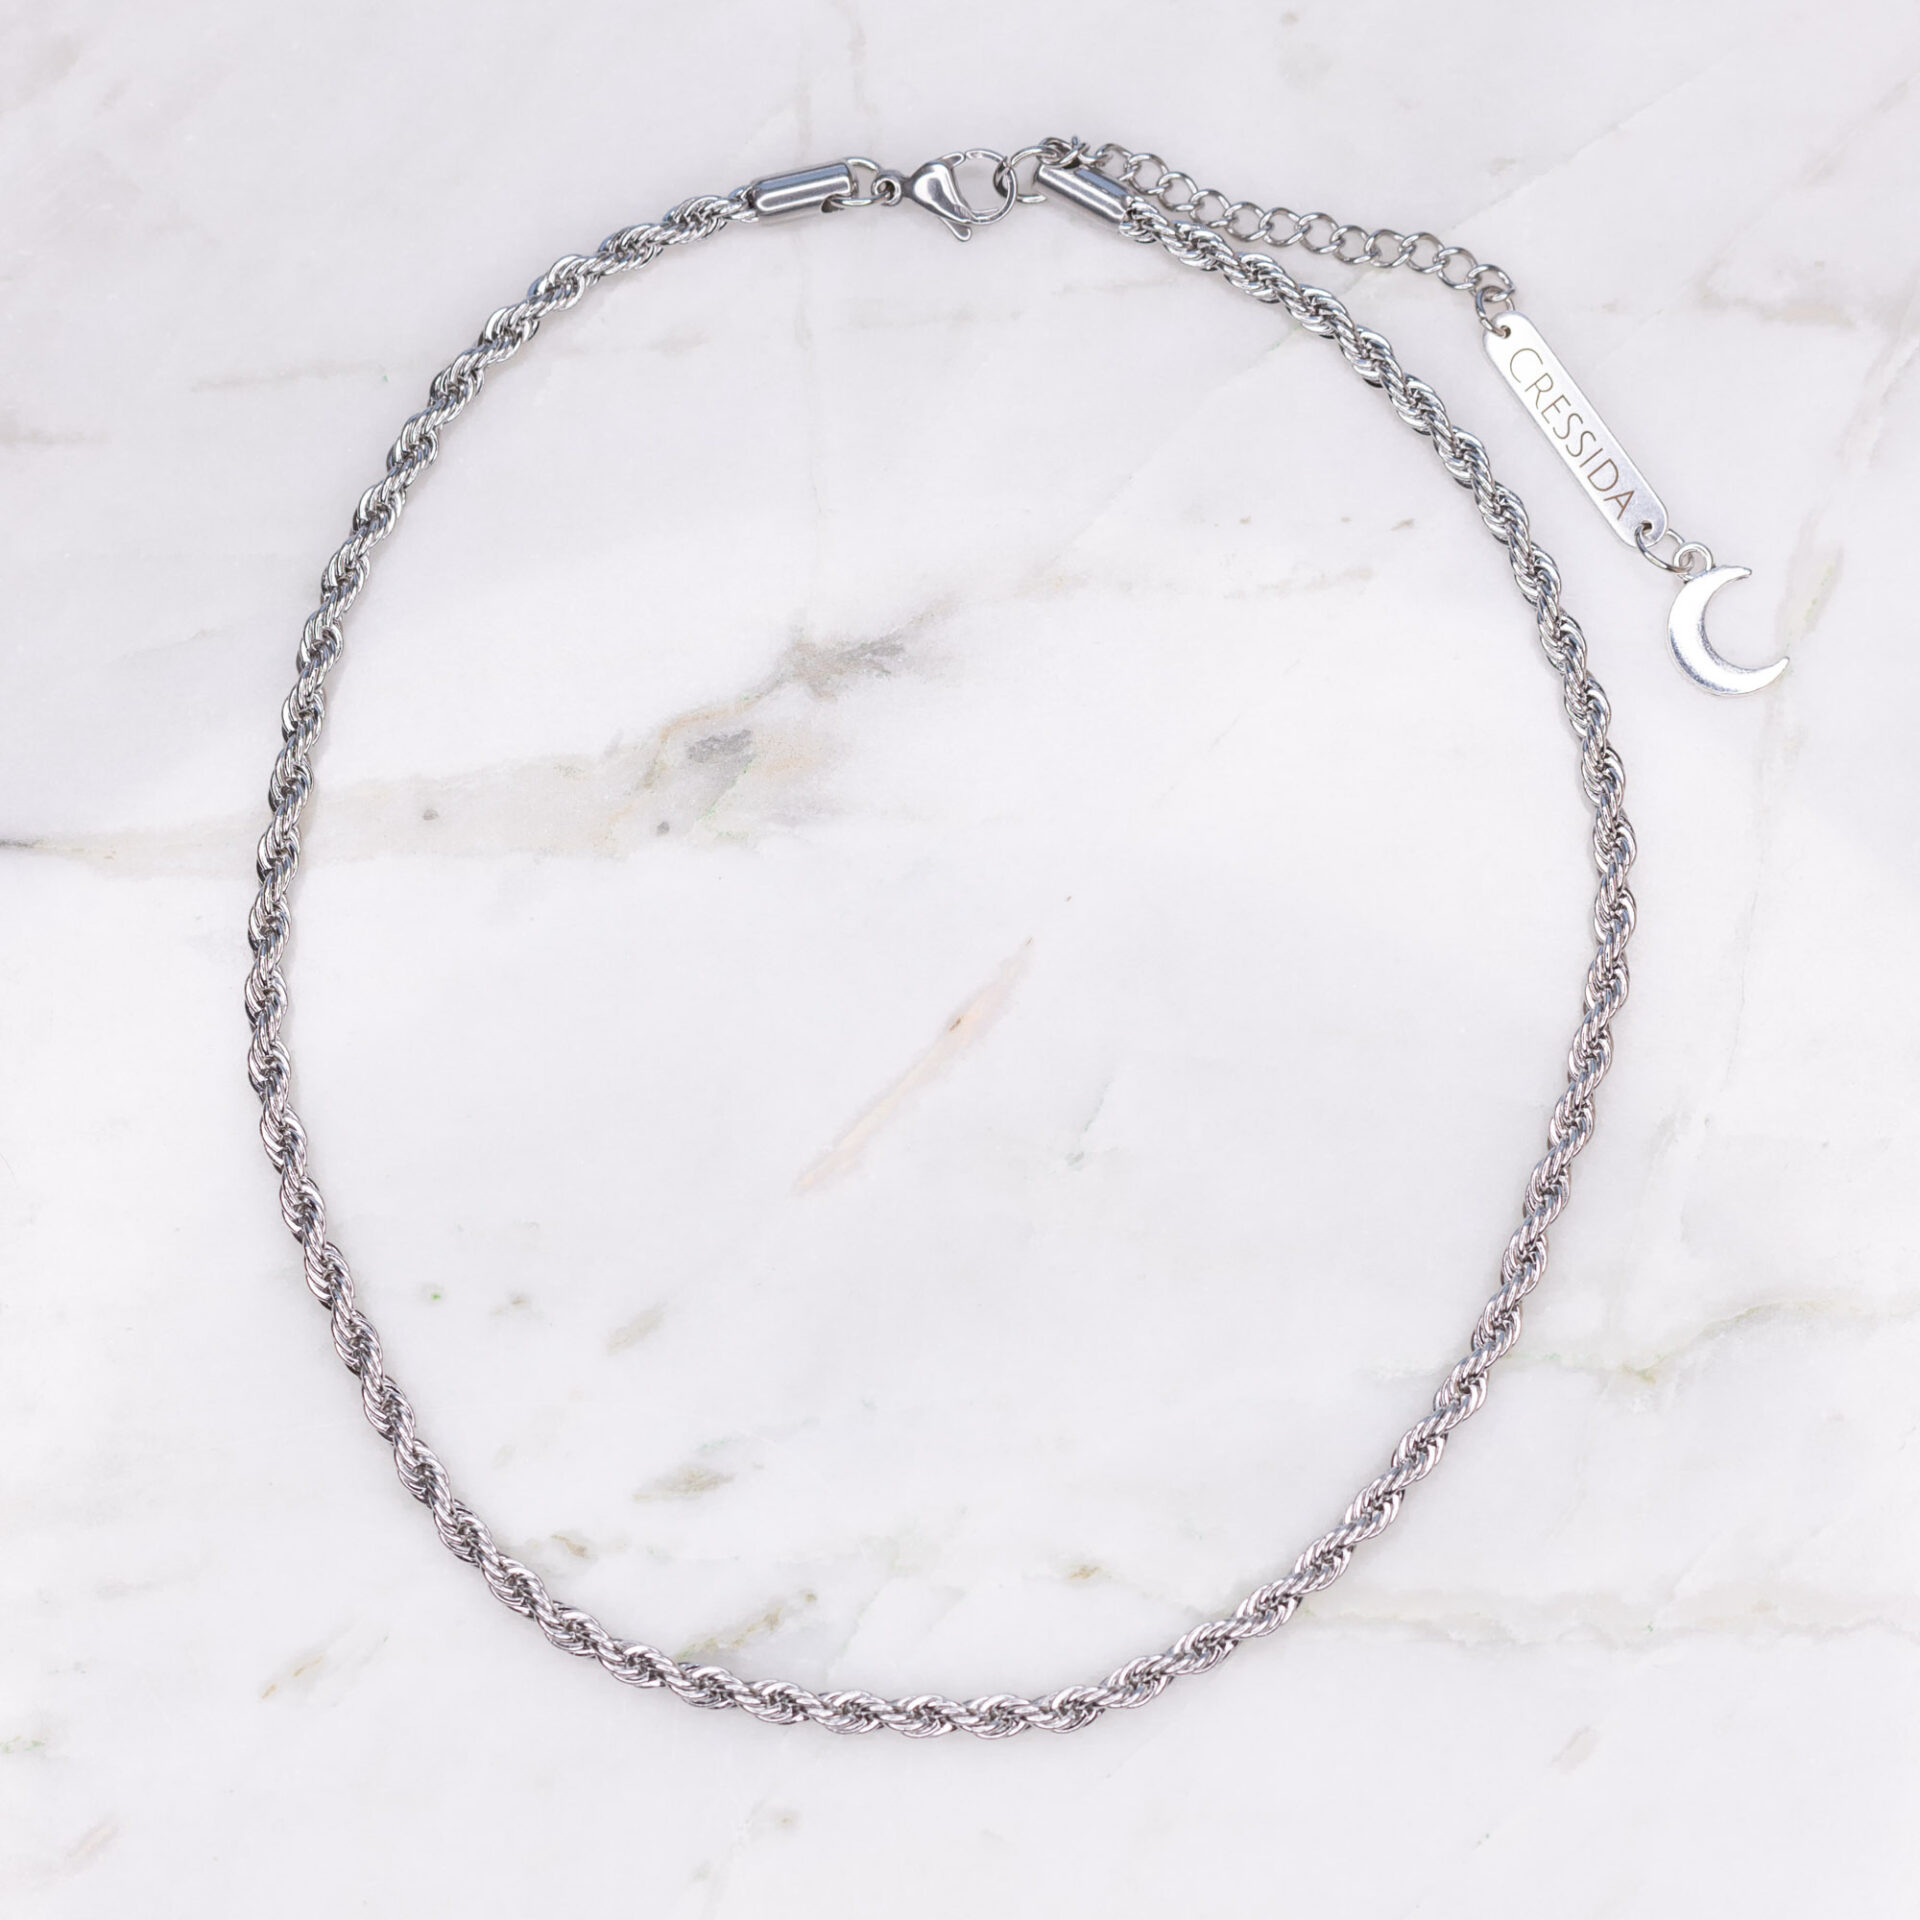 Rope Silver Necklace